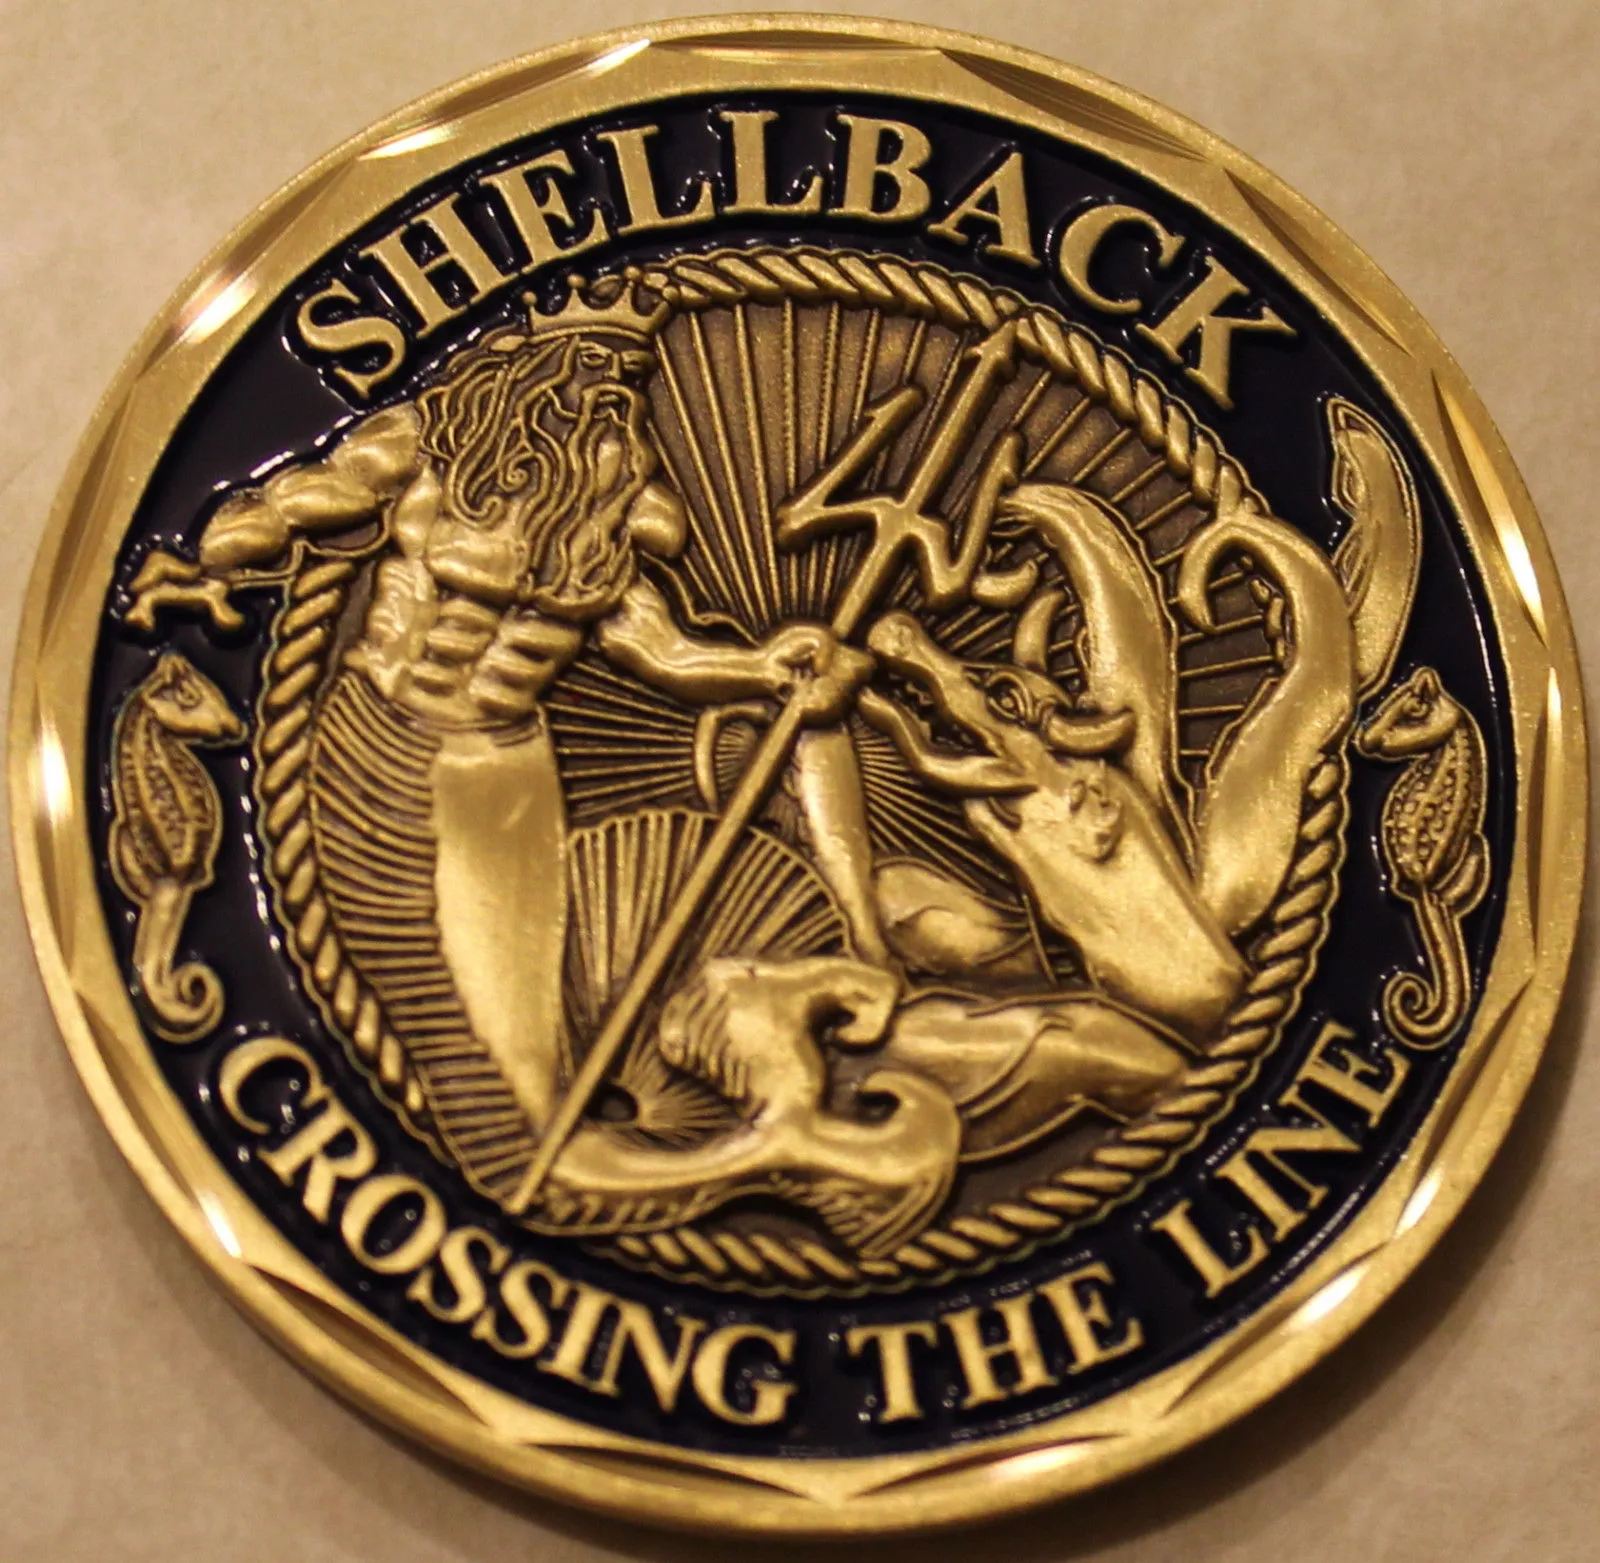 The sample order,Shellback Navy Marine Corps Challenge Coin US military challenge coin Military hobby collection coin